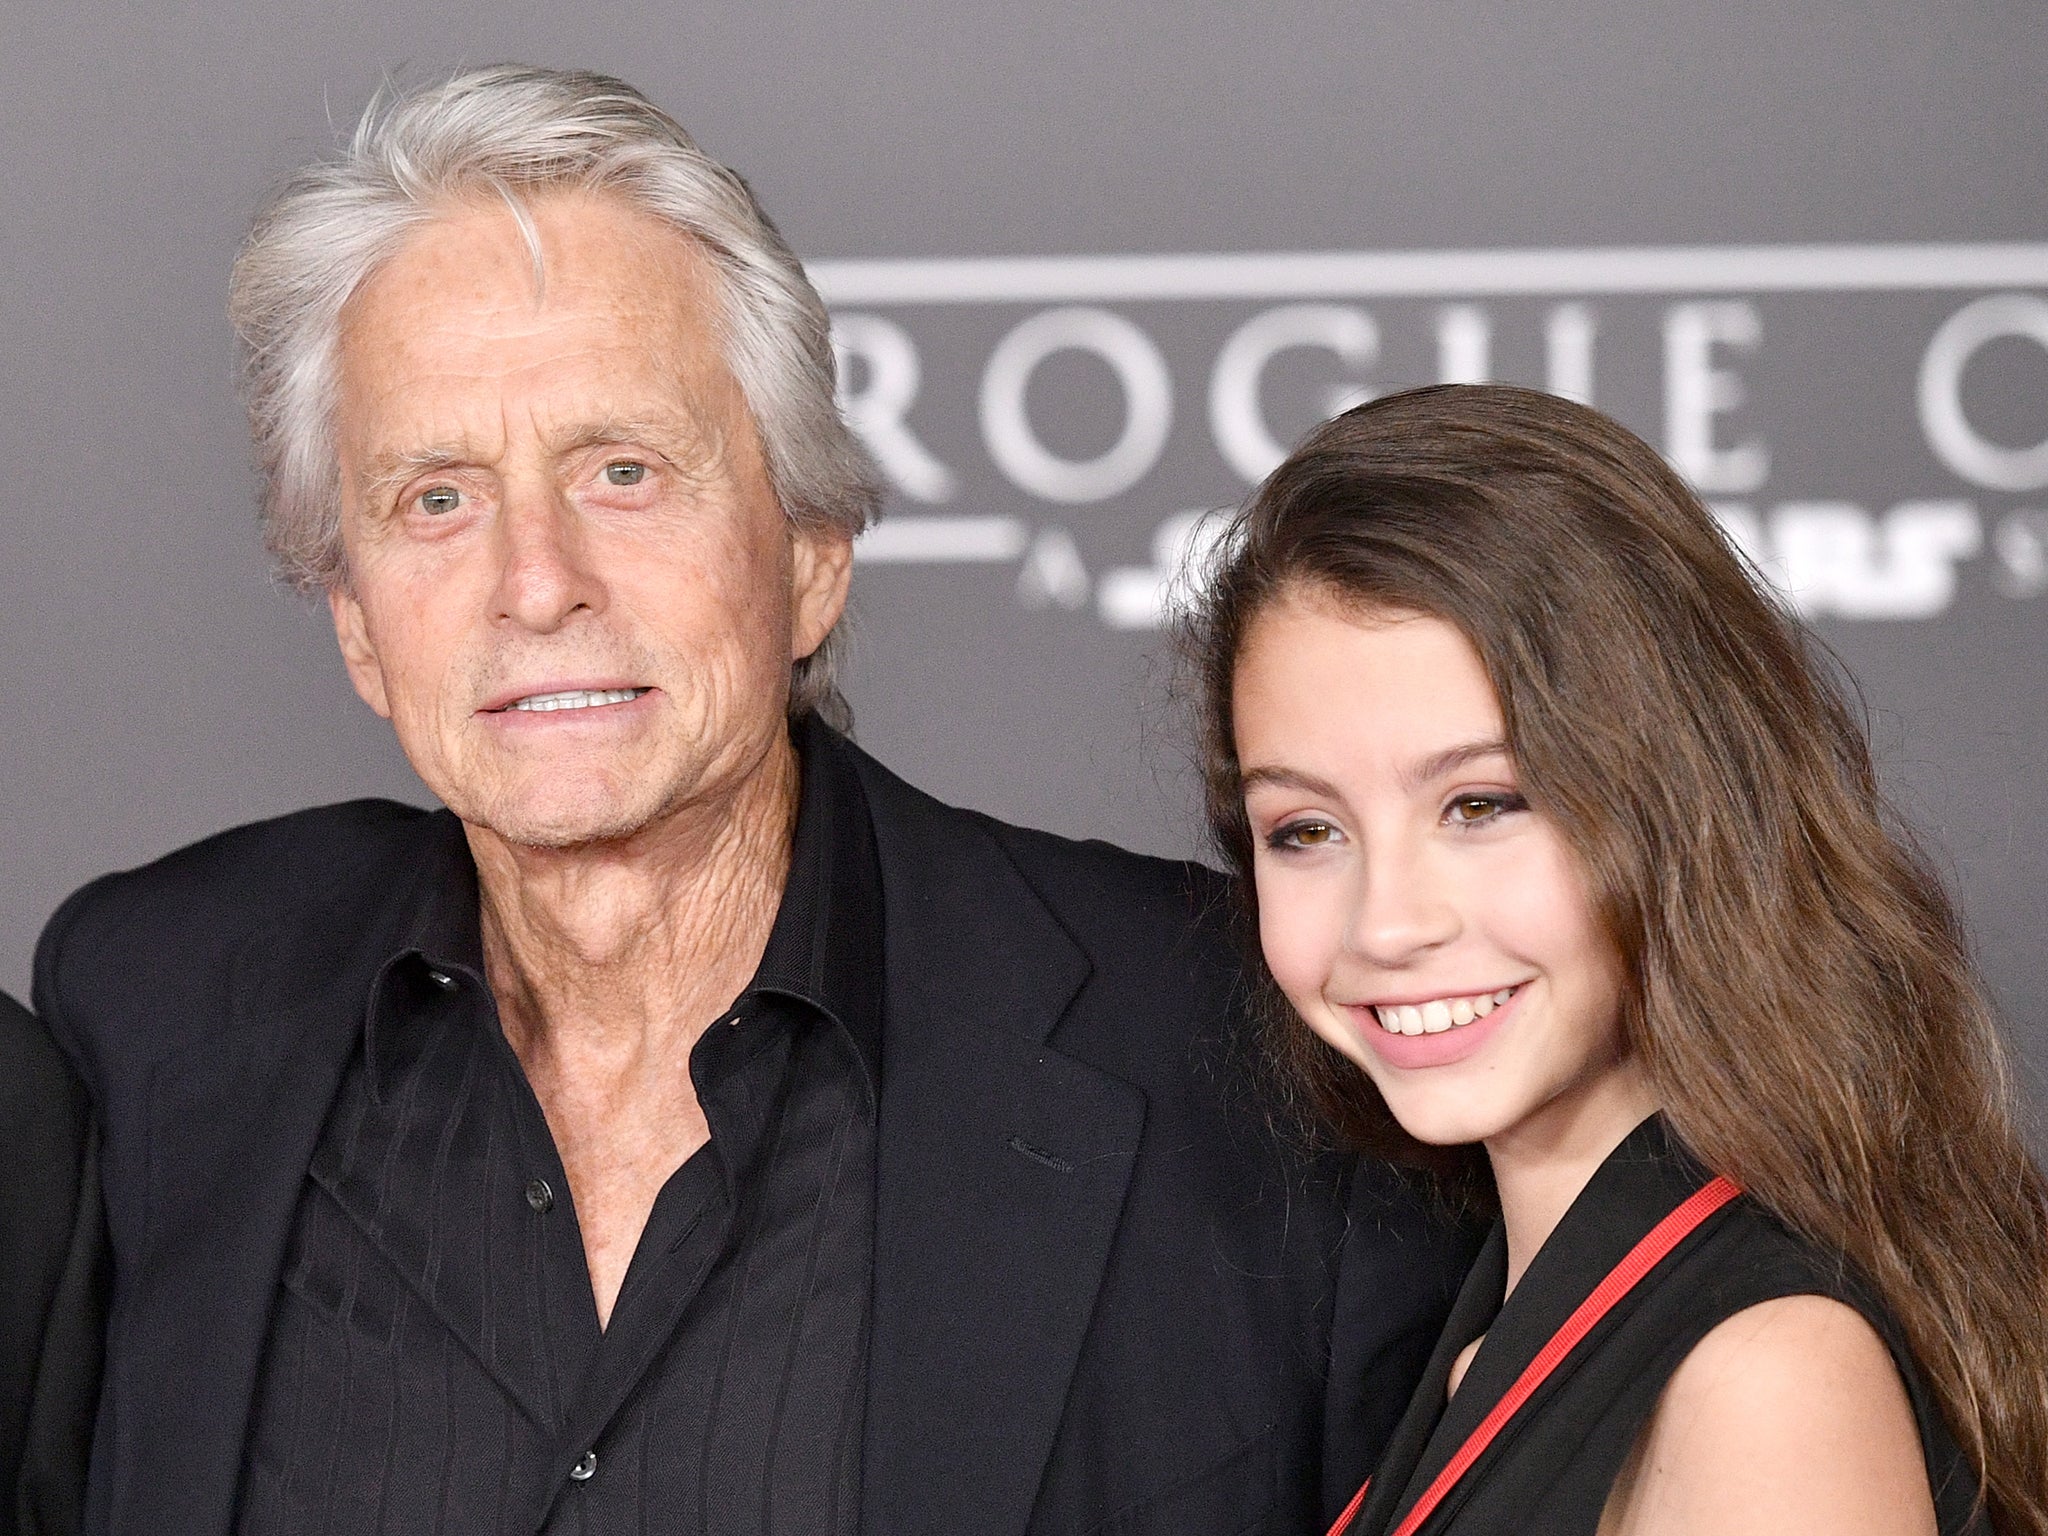 Michael Douglas, 76, was confused for 18-year-old daughters grandfather at her graduation The Independent image pic pic